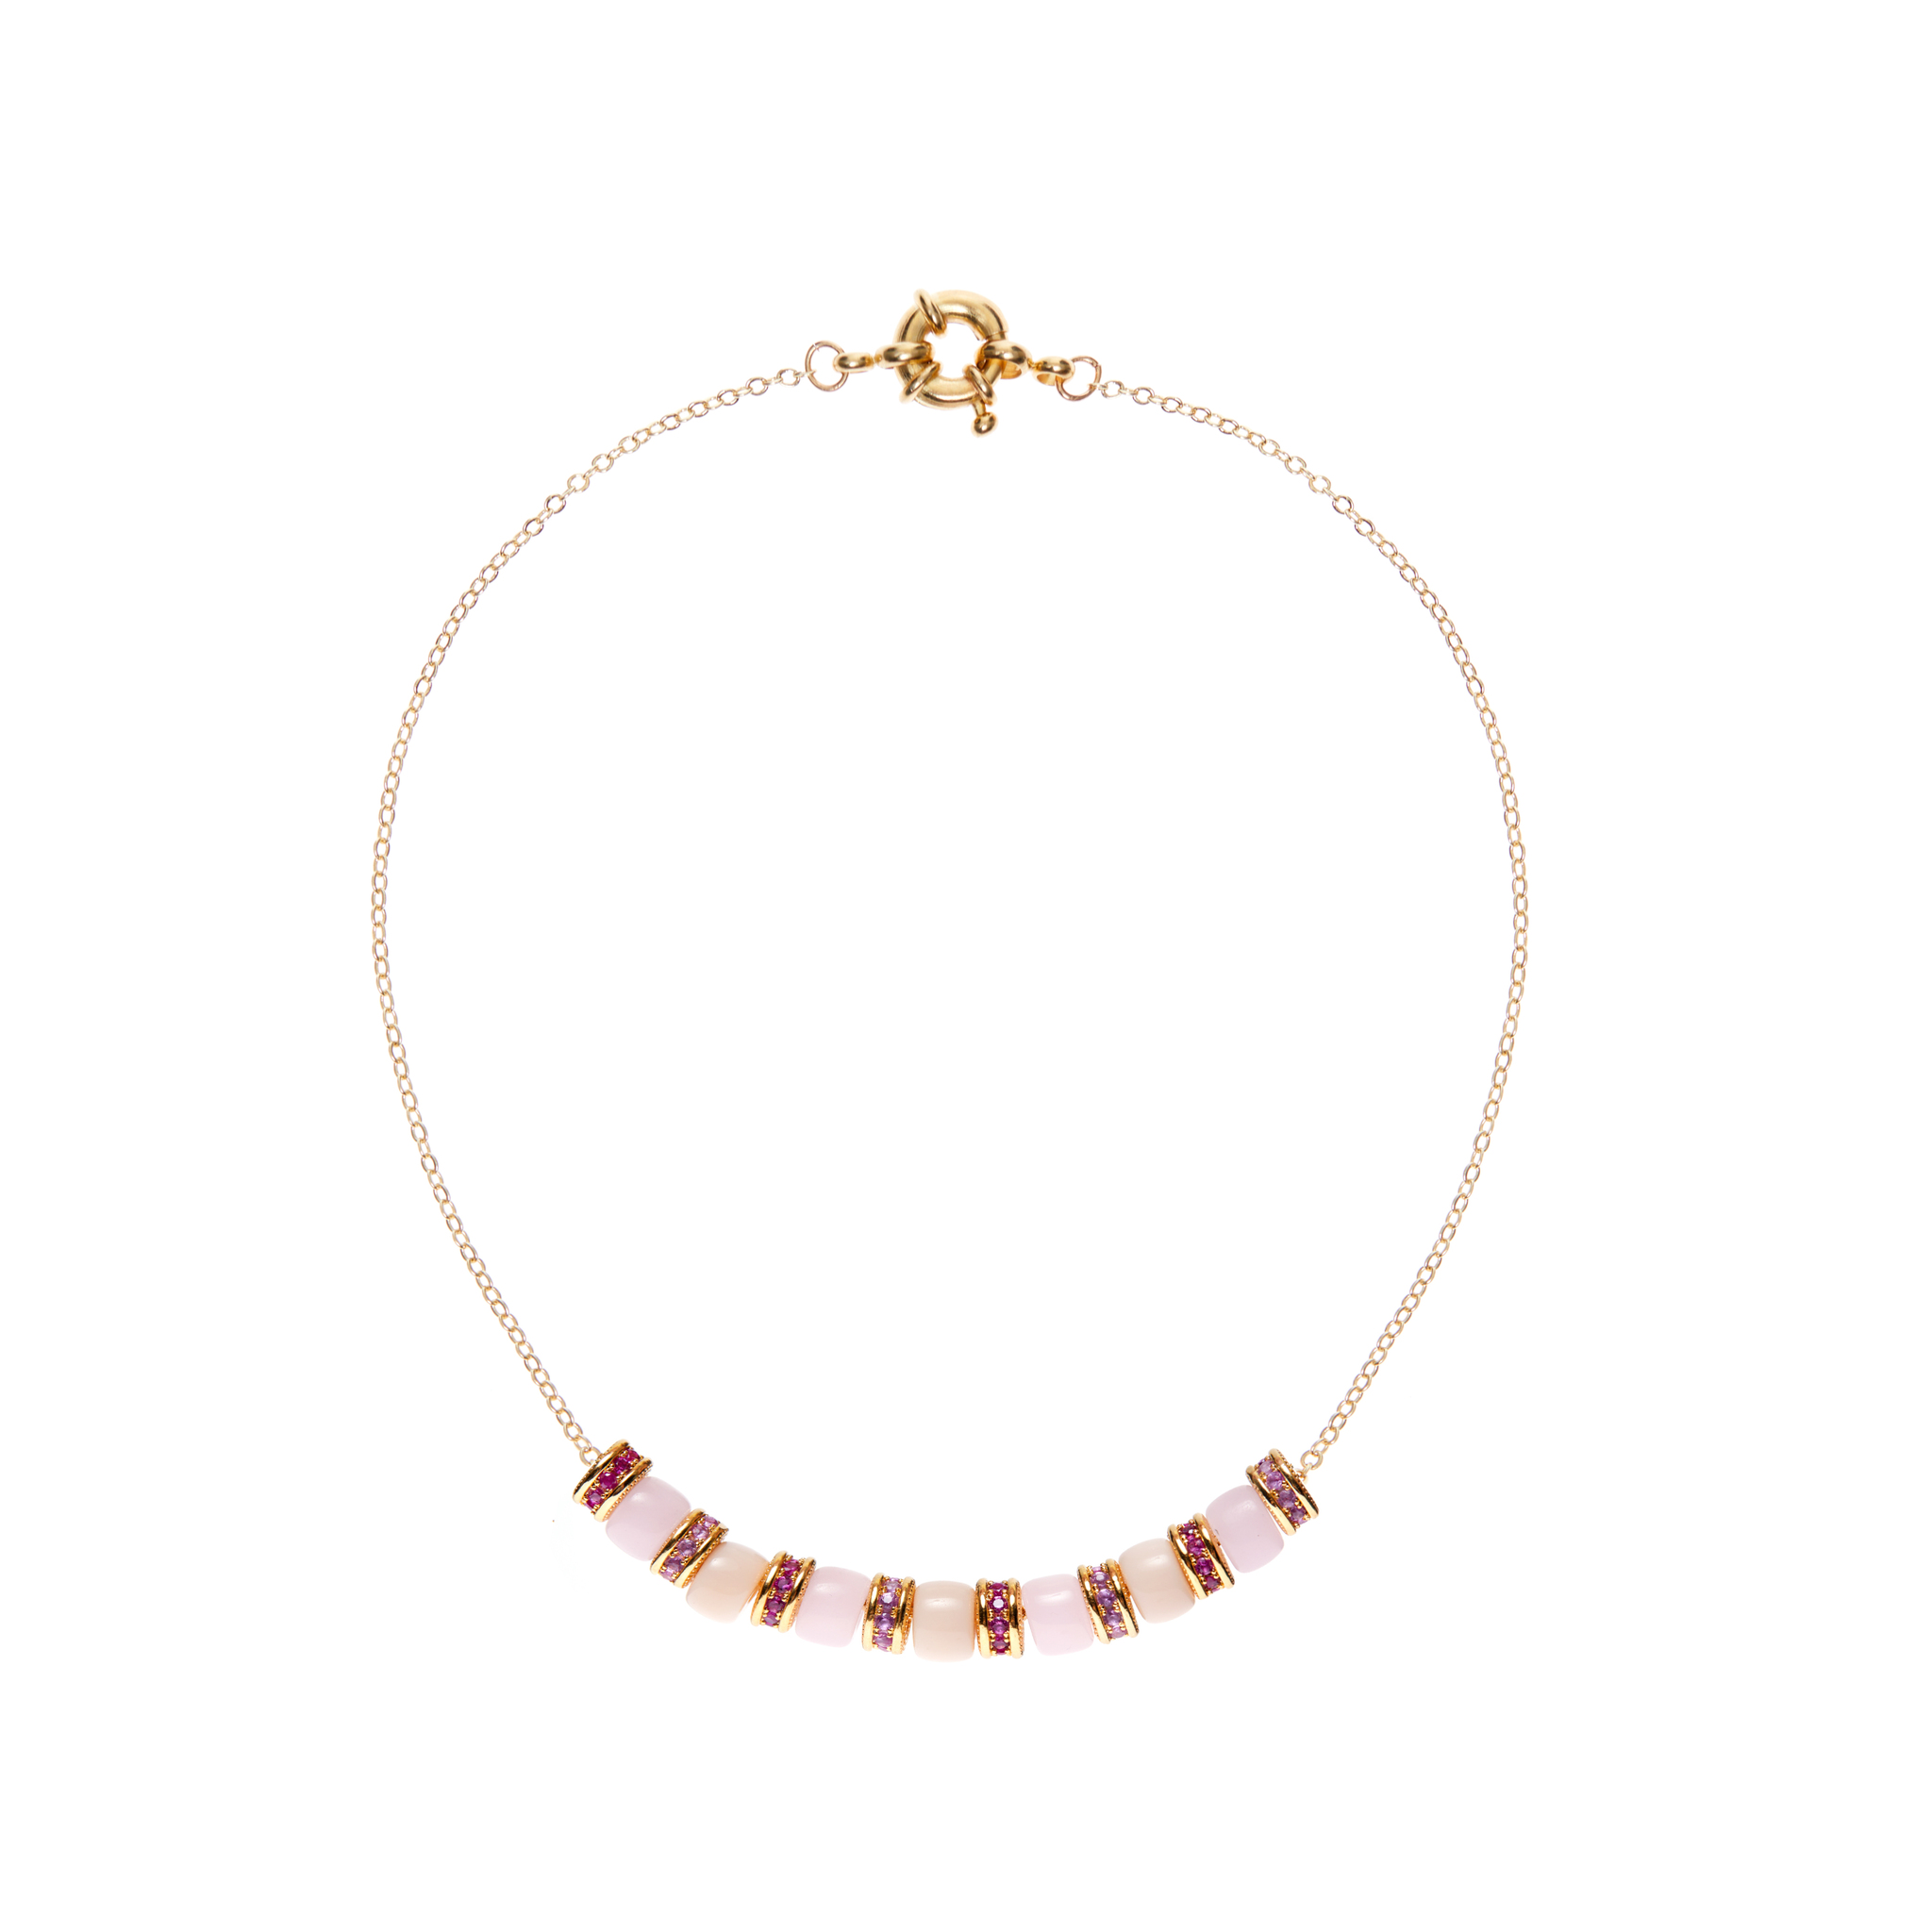 HOLLY JUNE Колье Beads Necklace – Pink holly june колье pink and yellow crystal pearl necklace